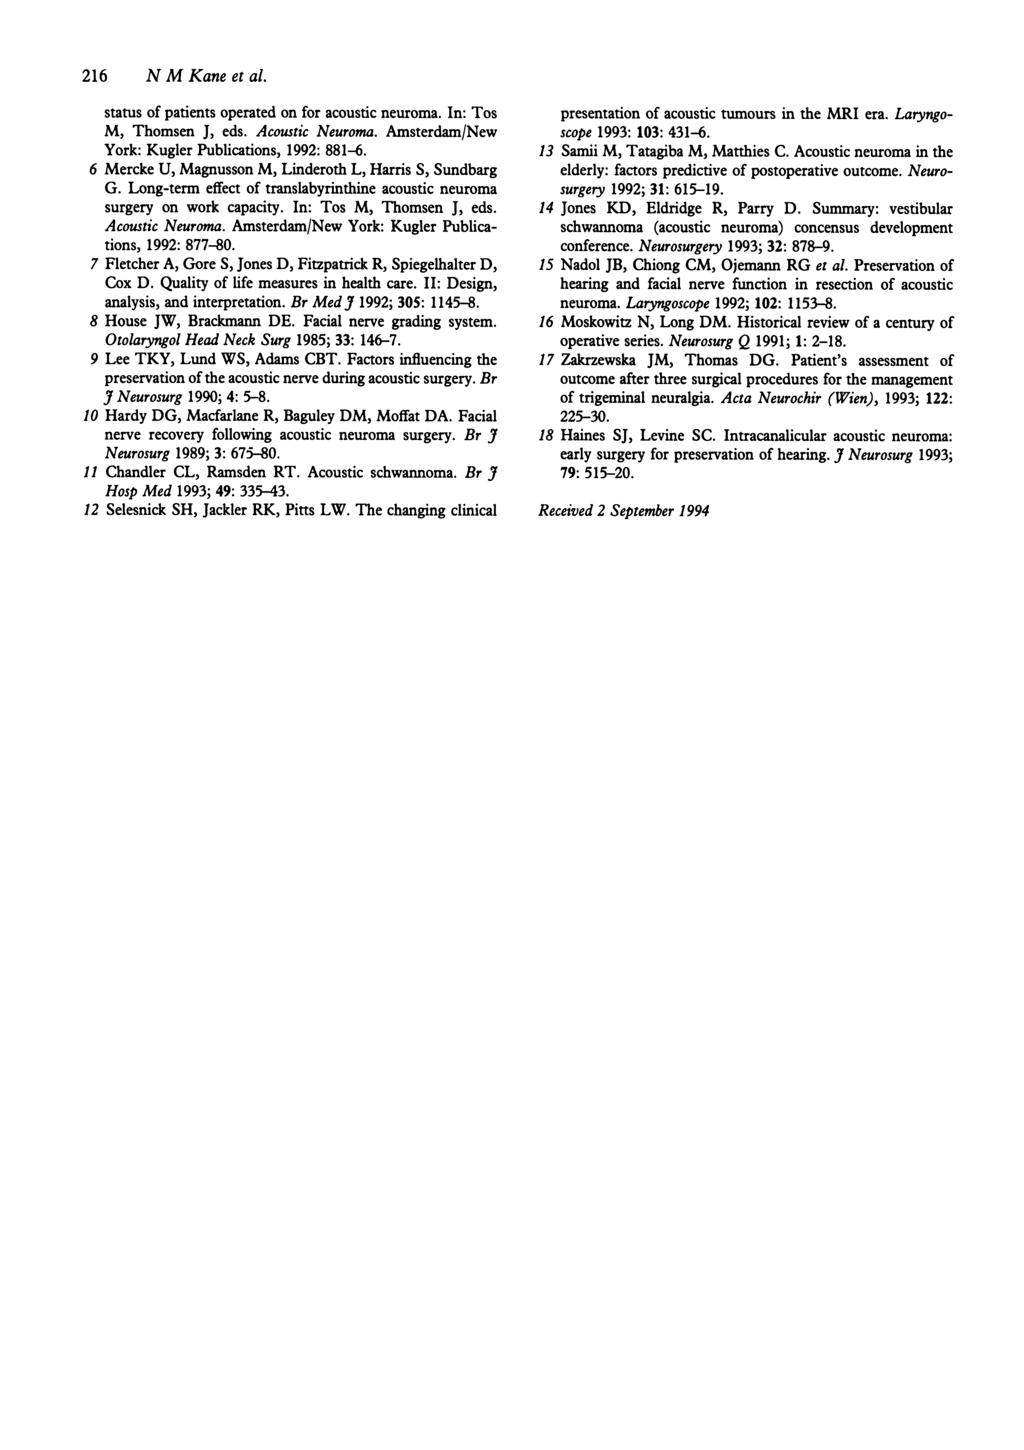 216 NMKaneetal. status of patients operated on for acoustic neuroma. In: Tos M, Thomsen J, eds. Acoustic Neuroma. Amsterdam/New York: Kugler Publications, 1992: 881-6.